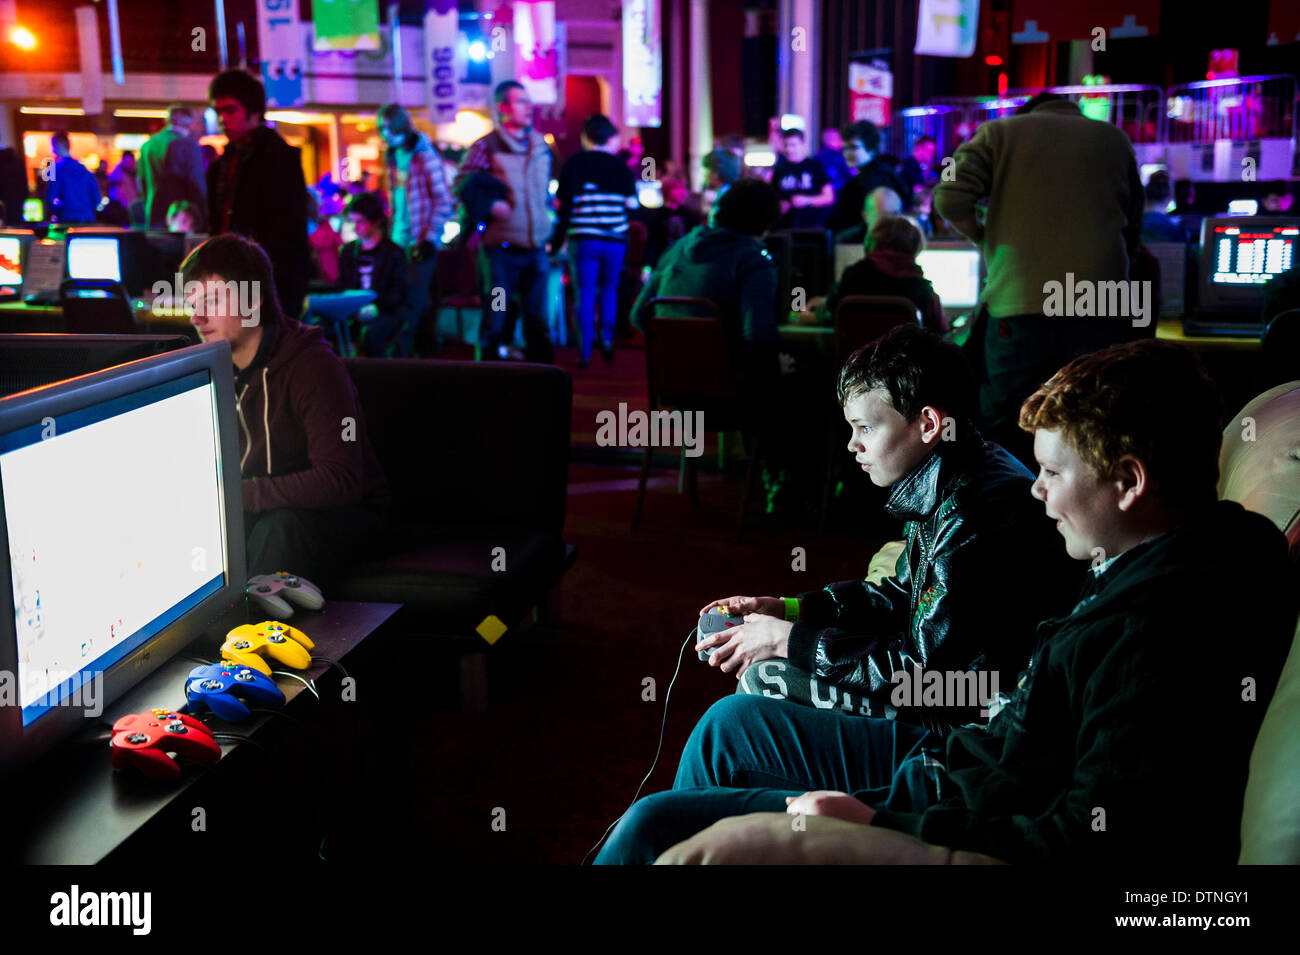 Margate, Kent, UK. 21st February, 2014.  Young teenagers enjoying themselves at a gaming EXPO in Margate in Kent.  Photographer: Gordon Scammell/Alamy Live News Stock Photo